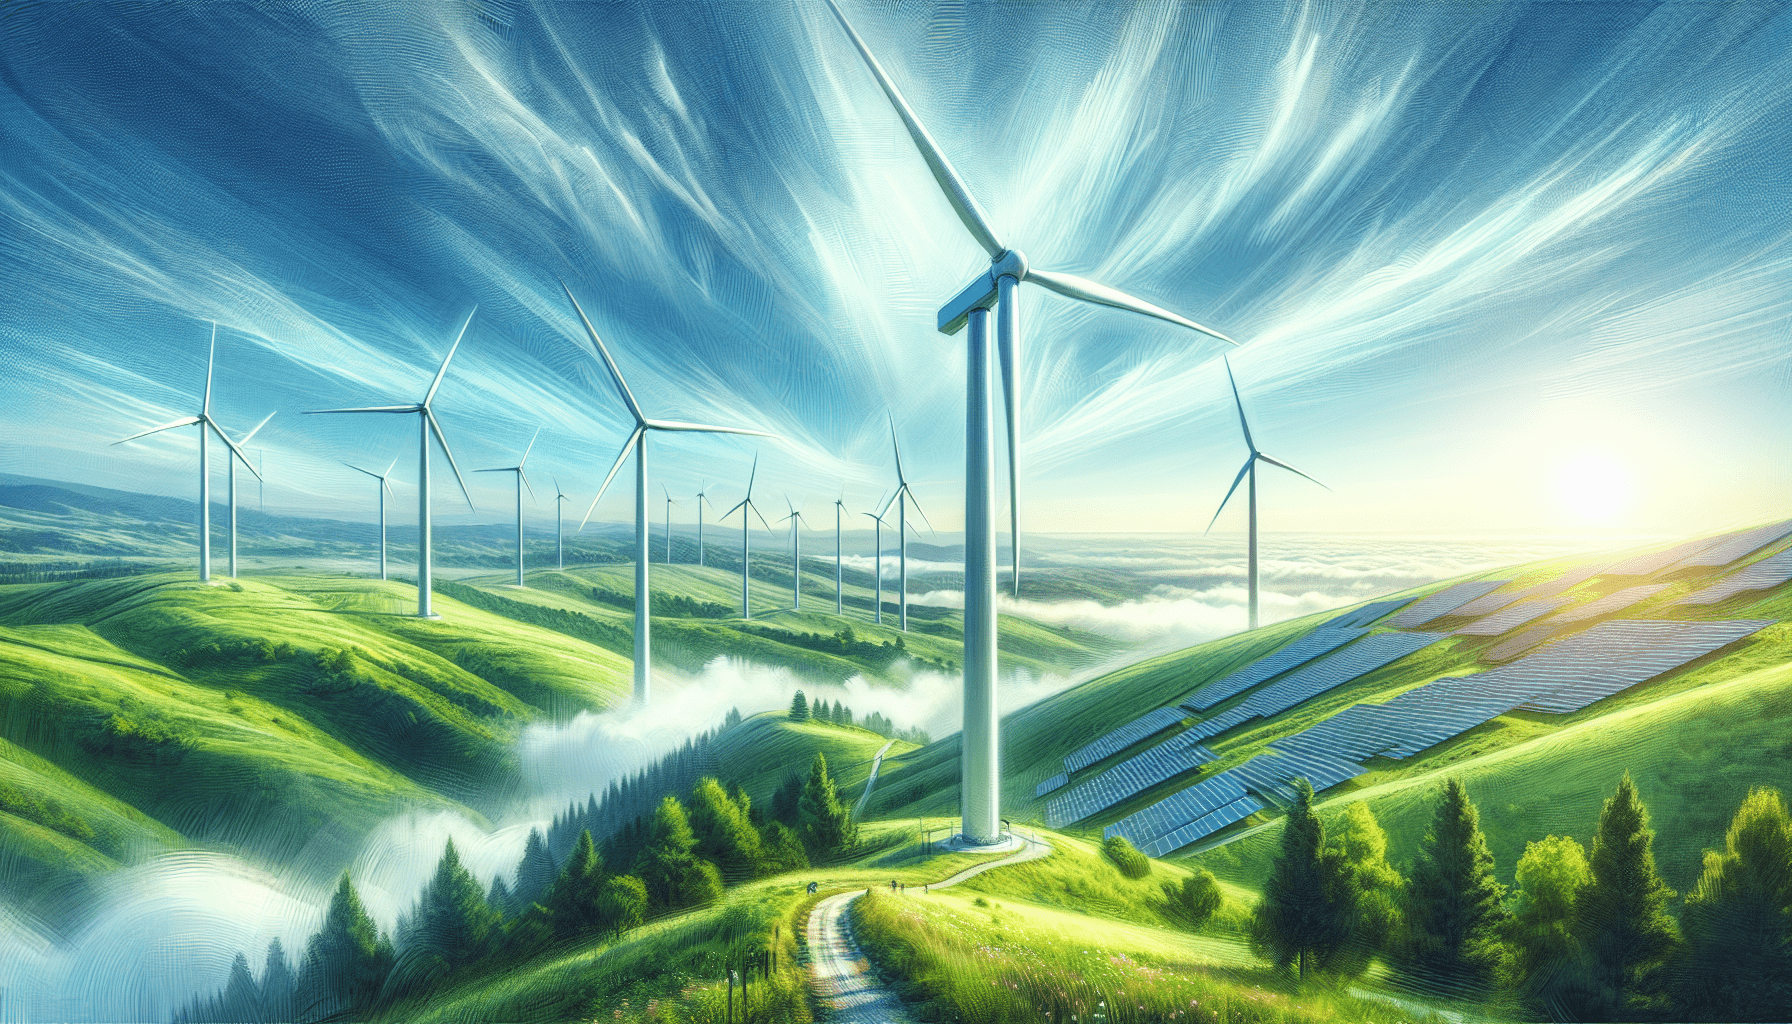 What Are The Benefits Of Using Renewable Energy Technologies?